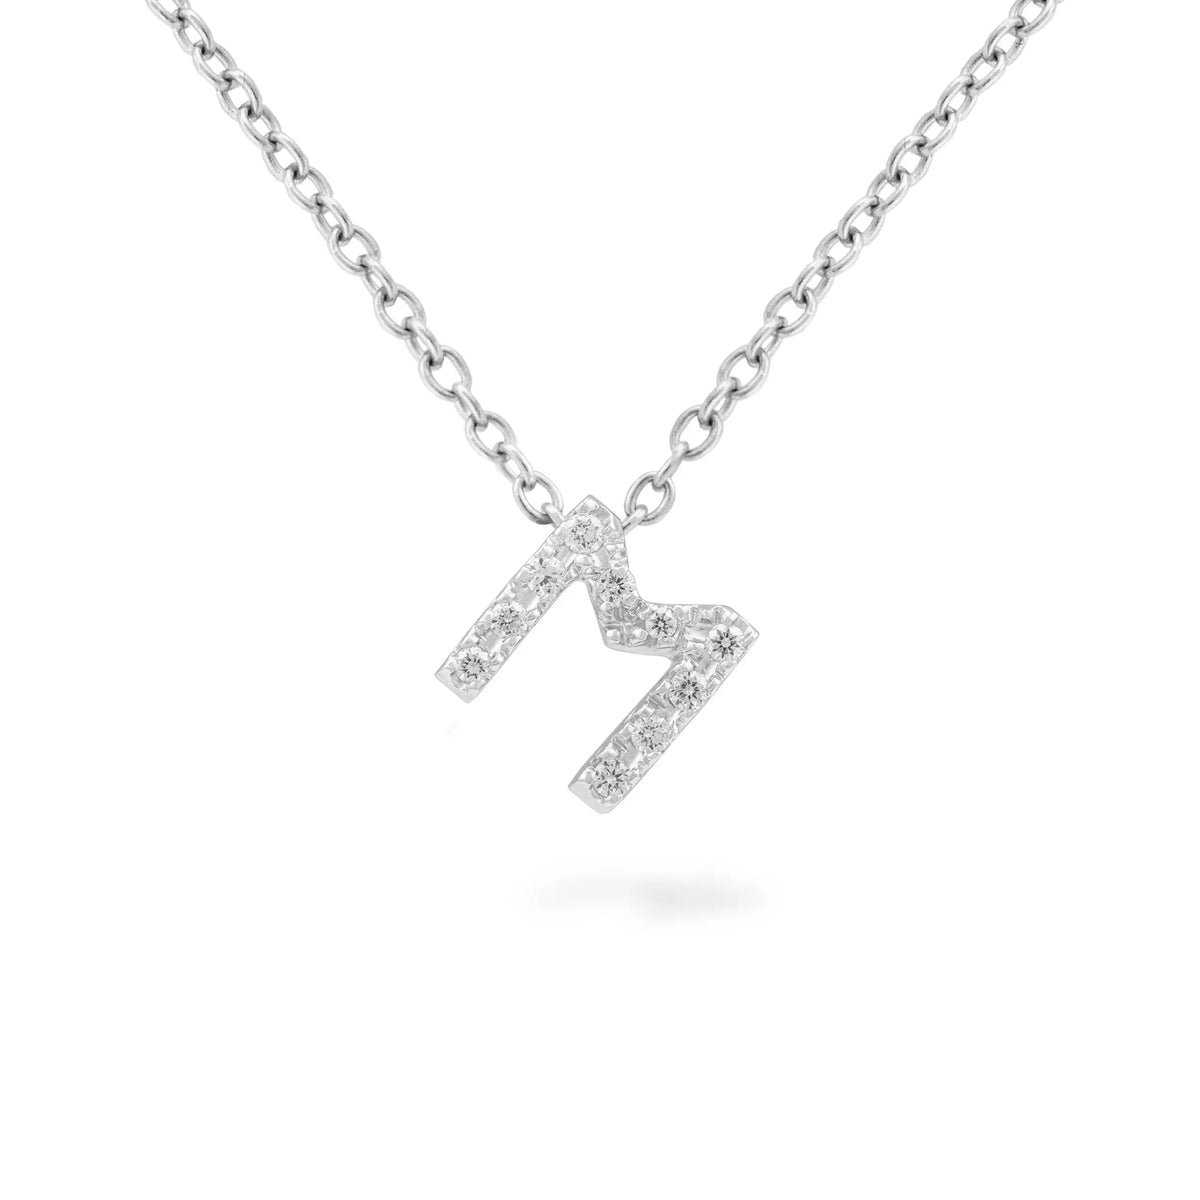 18K white gold necklace with letter pendant in white gold and diamonds .07 cttw  Length: 18 inches  If an item is out of stock, please allow 4-6 weeks for delivery  Designed by Piero Milano